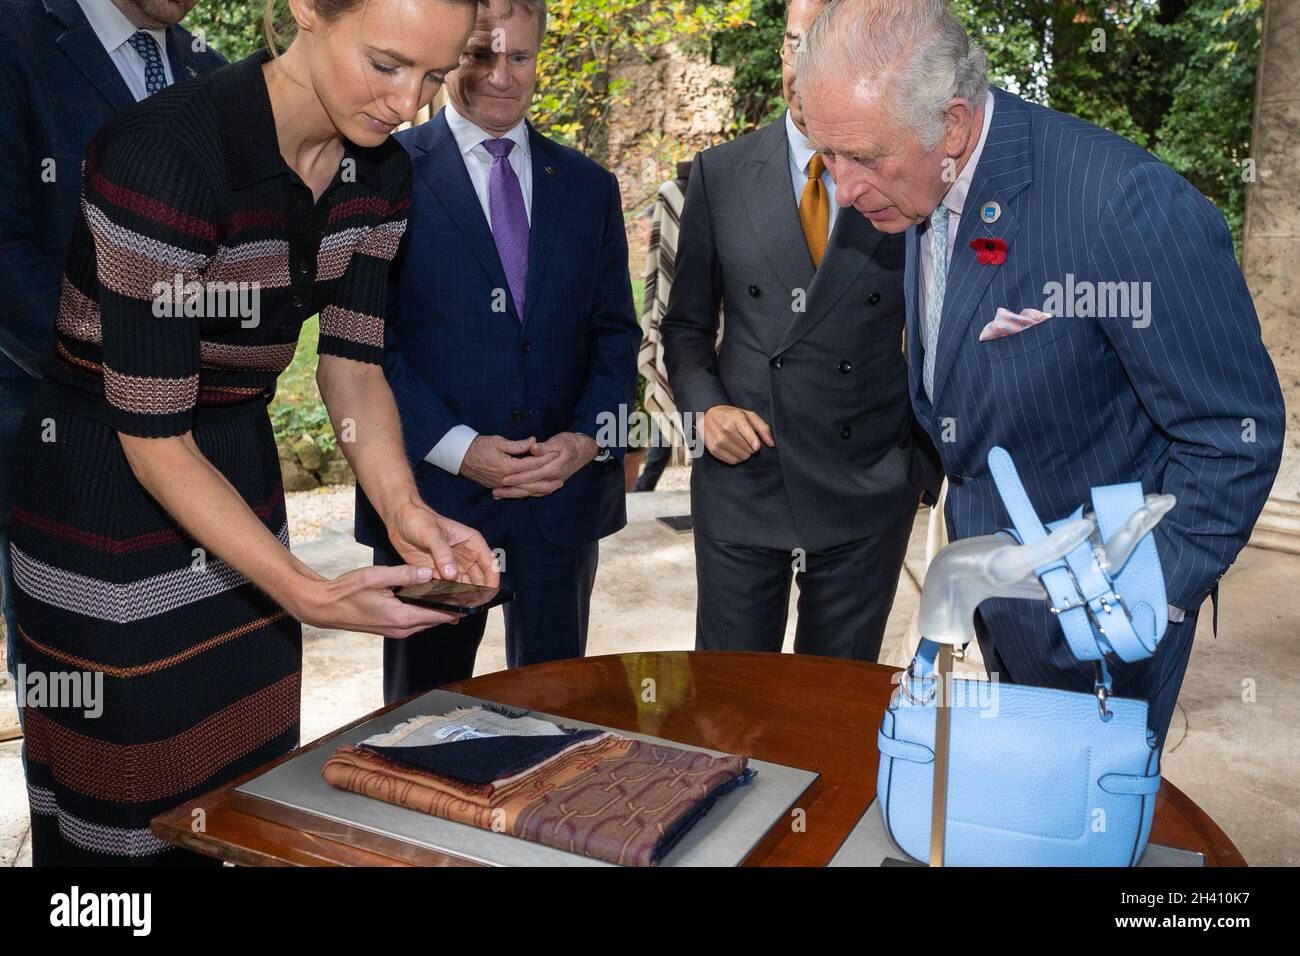 The Prince of Wales views The SMI Fashion Coalition's Digital ID, a virtual certificate that records each item's history with members of the Fashion Coalition, one of the SMI's ten Industry Coalitions which includes CEOs from some of the leading fashion houses including Giorgio Armani, Mulberry and Chloe at the Villa Wolkonsky Residence Gardens in Rome. Picture date: Sunday October 31, 2021. Stock Photo